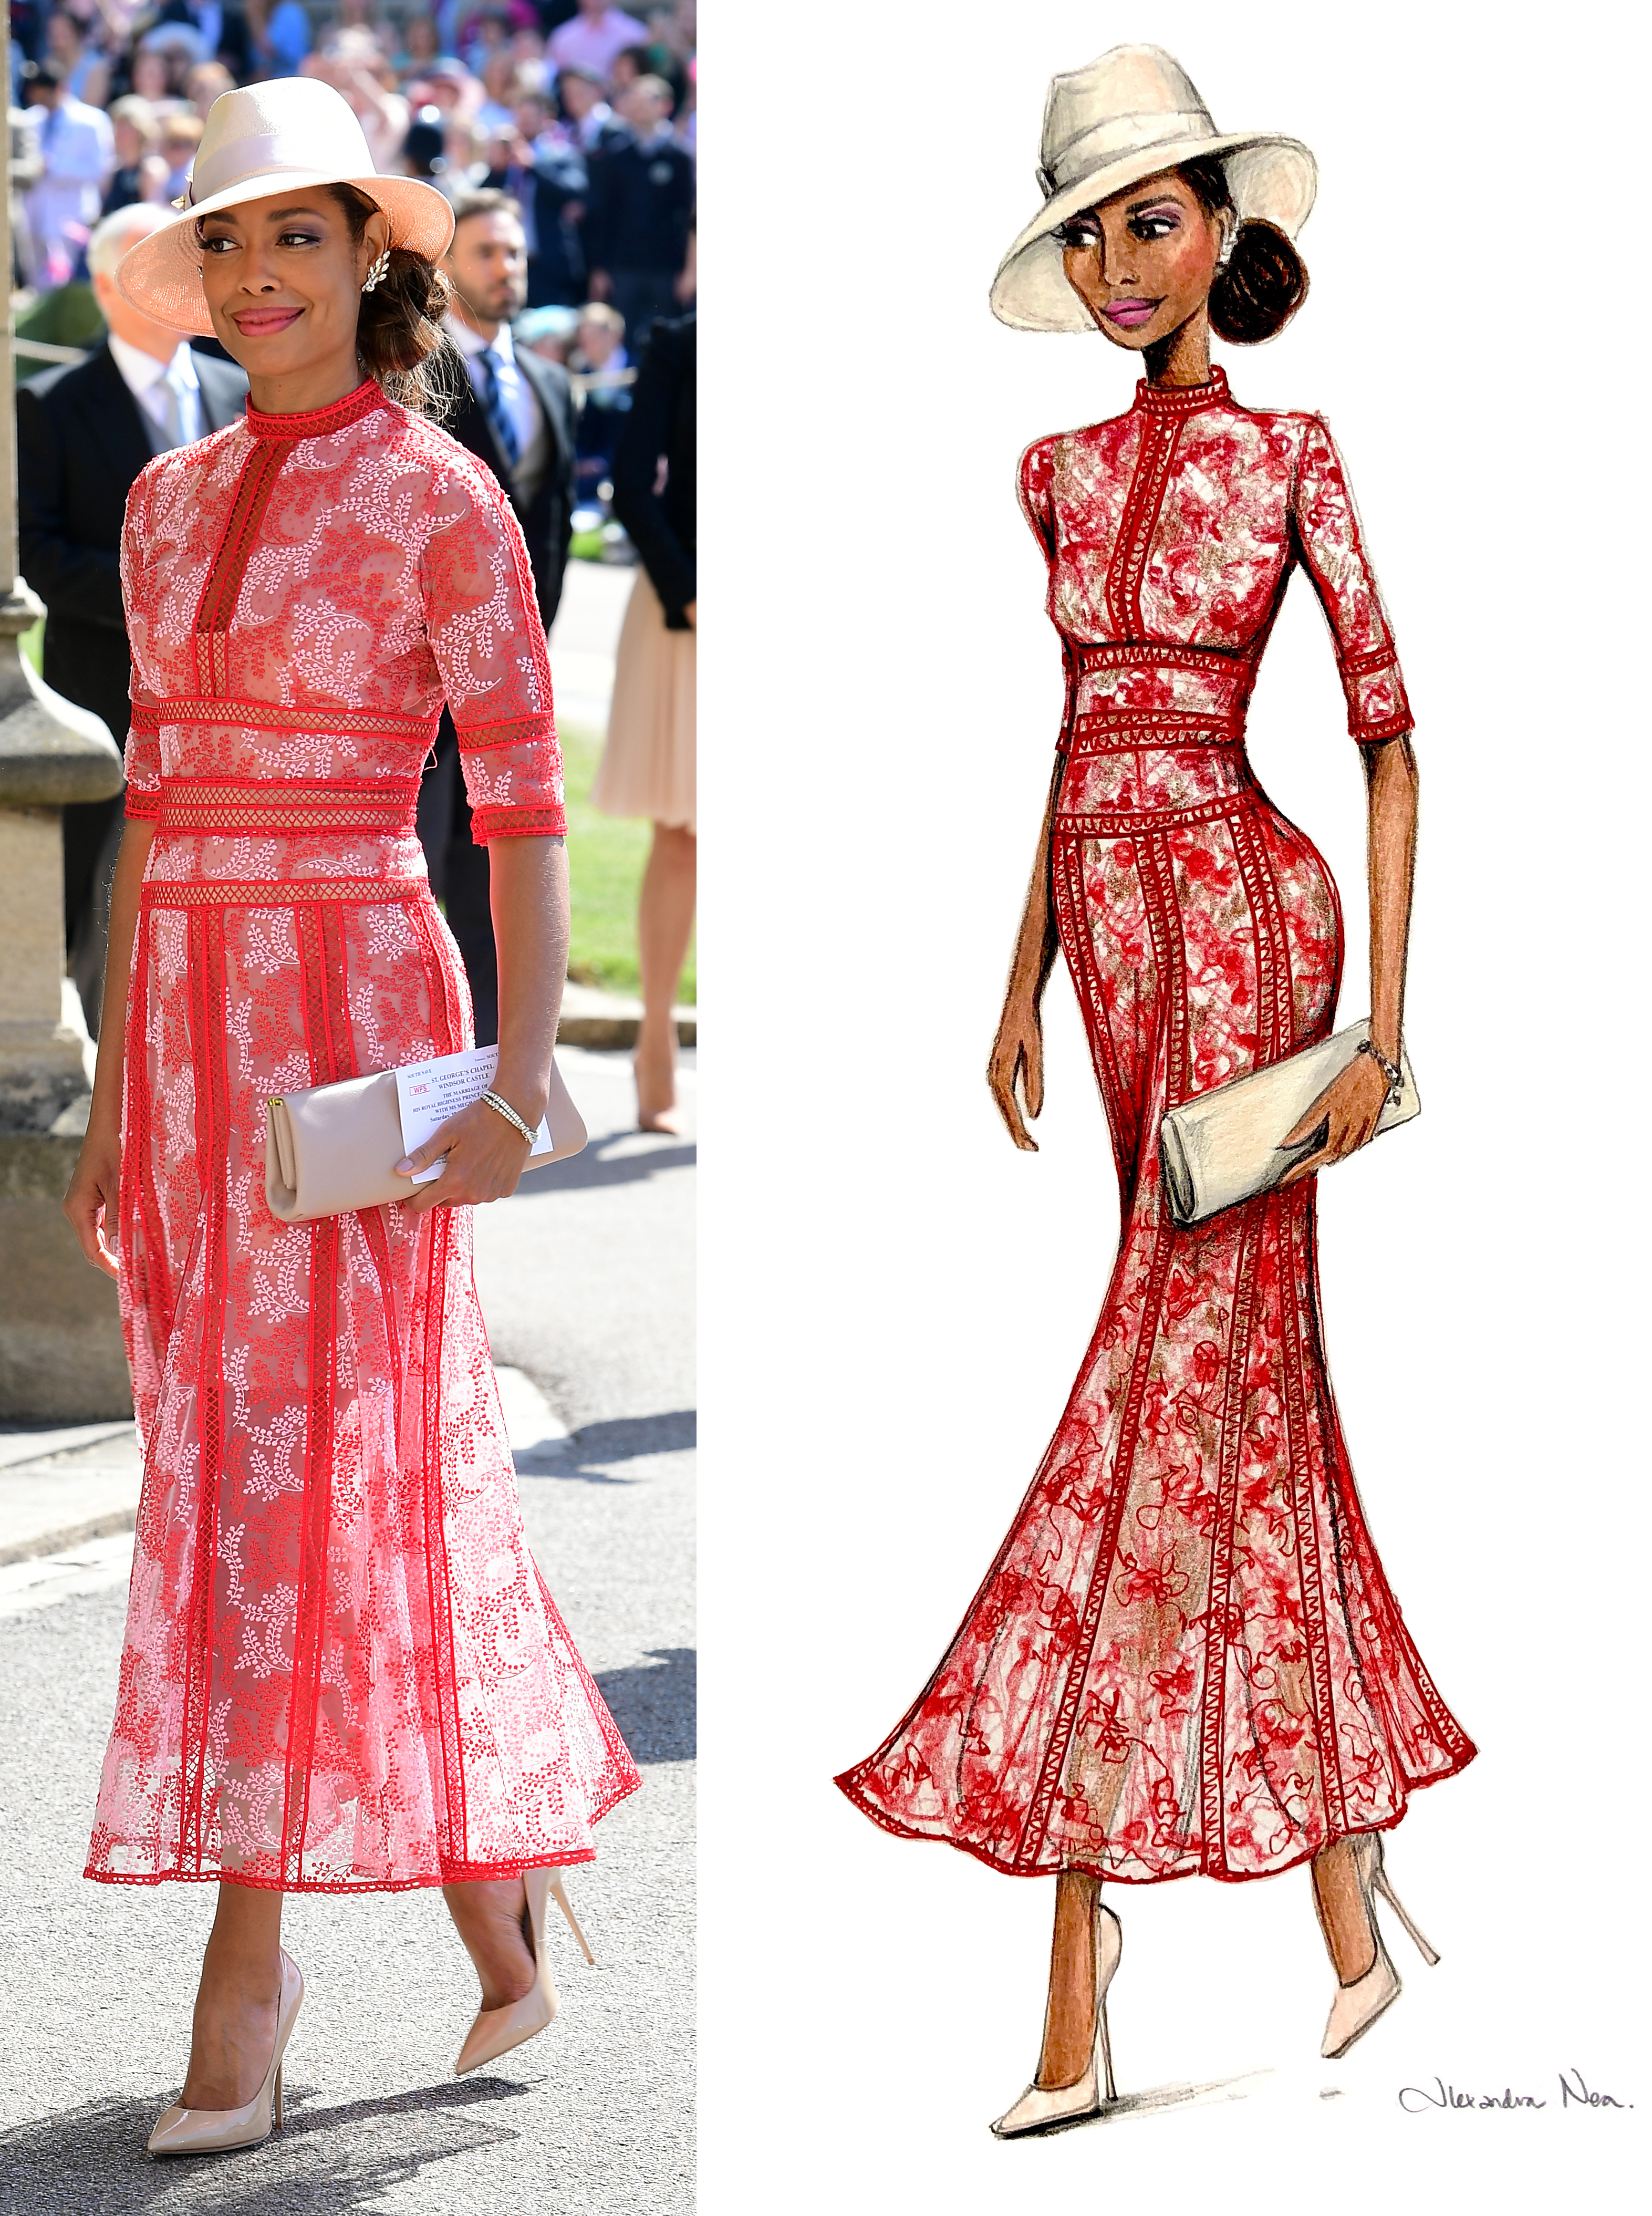 Gina Torres at the royal wedding and as recreated in a sketch by Alexandra Nea  (Ian West/PA/Alexandra Nea)